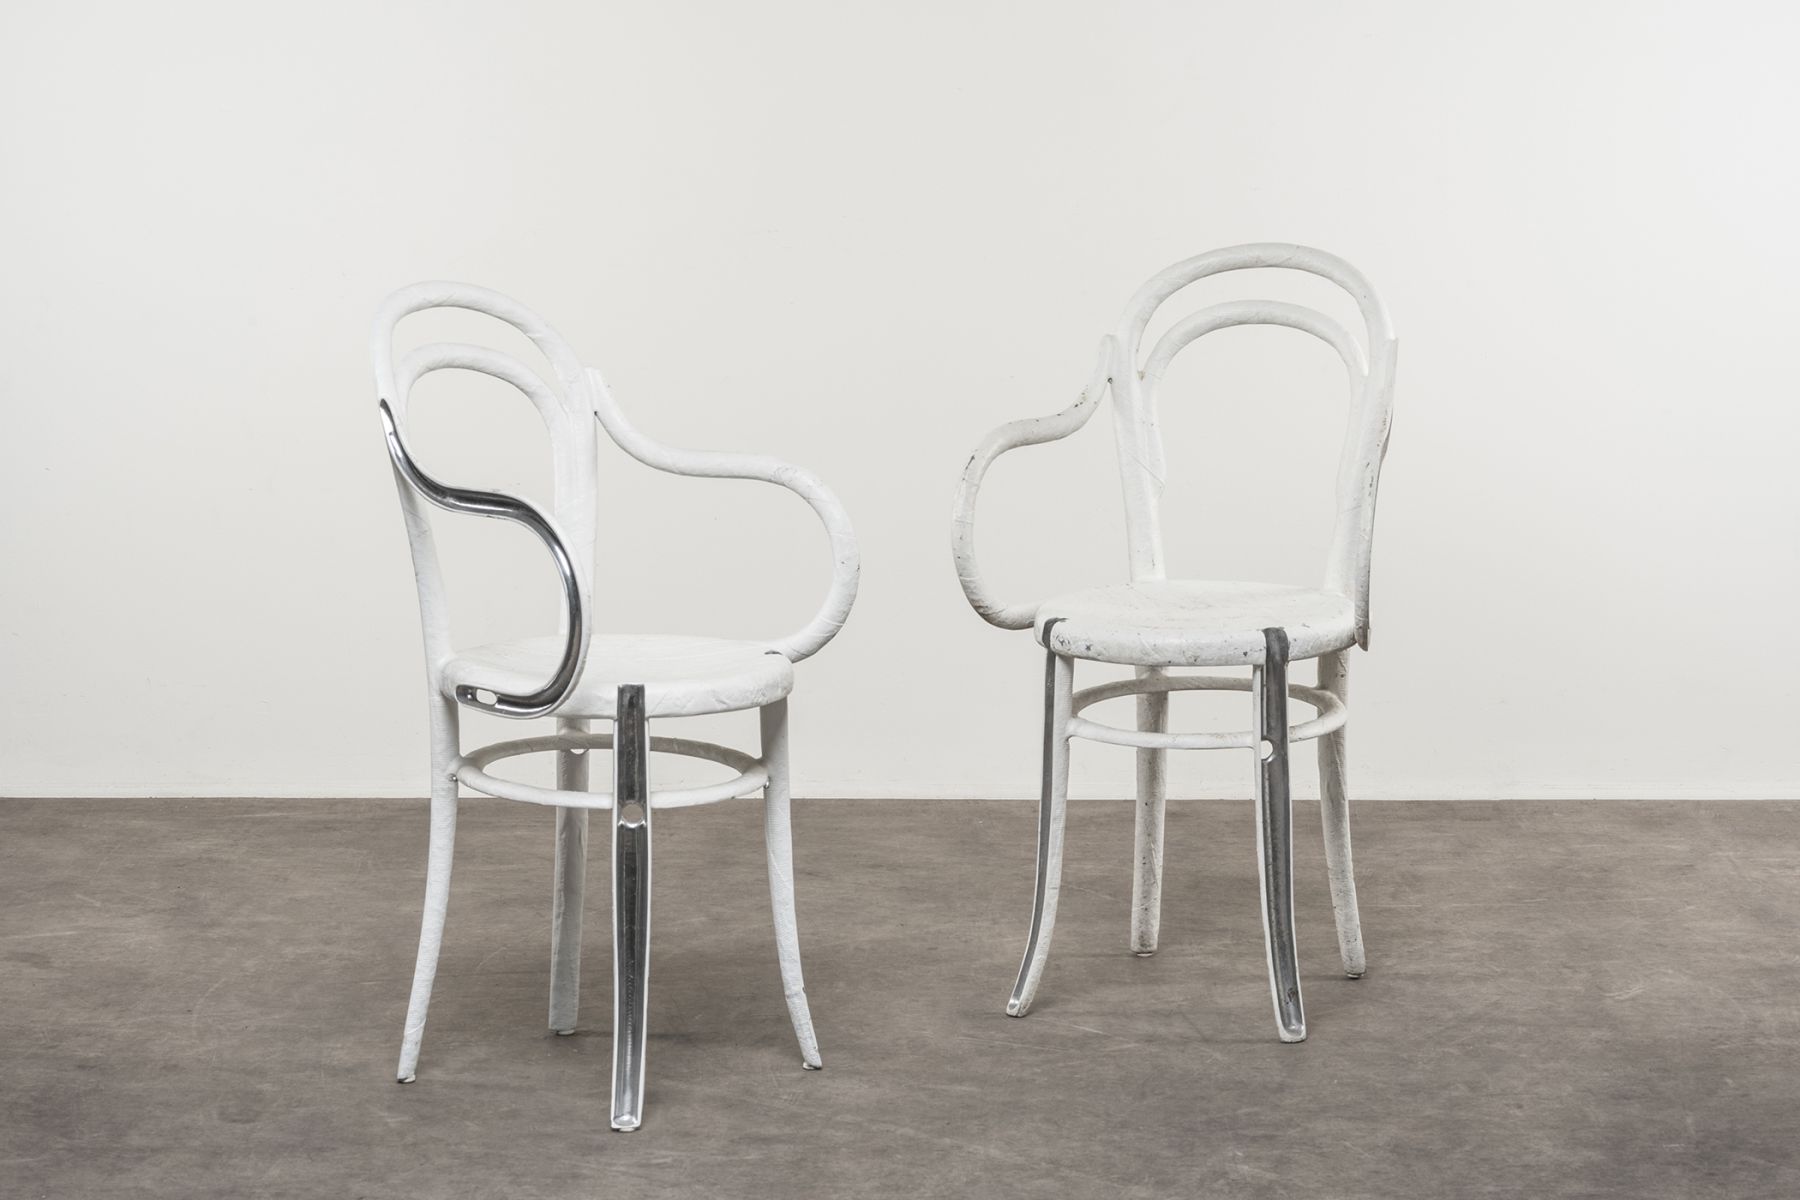 'Re-Thonet 14' chairs with arms Andrea Salvetti pic-1